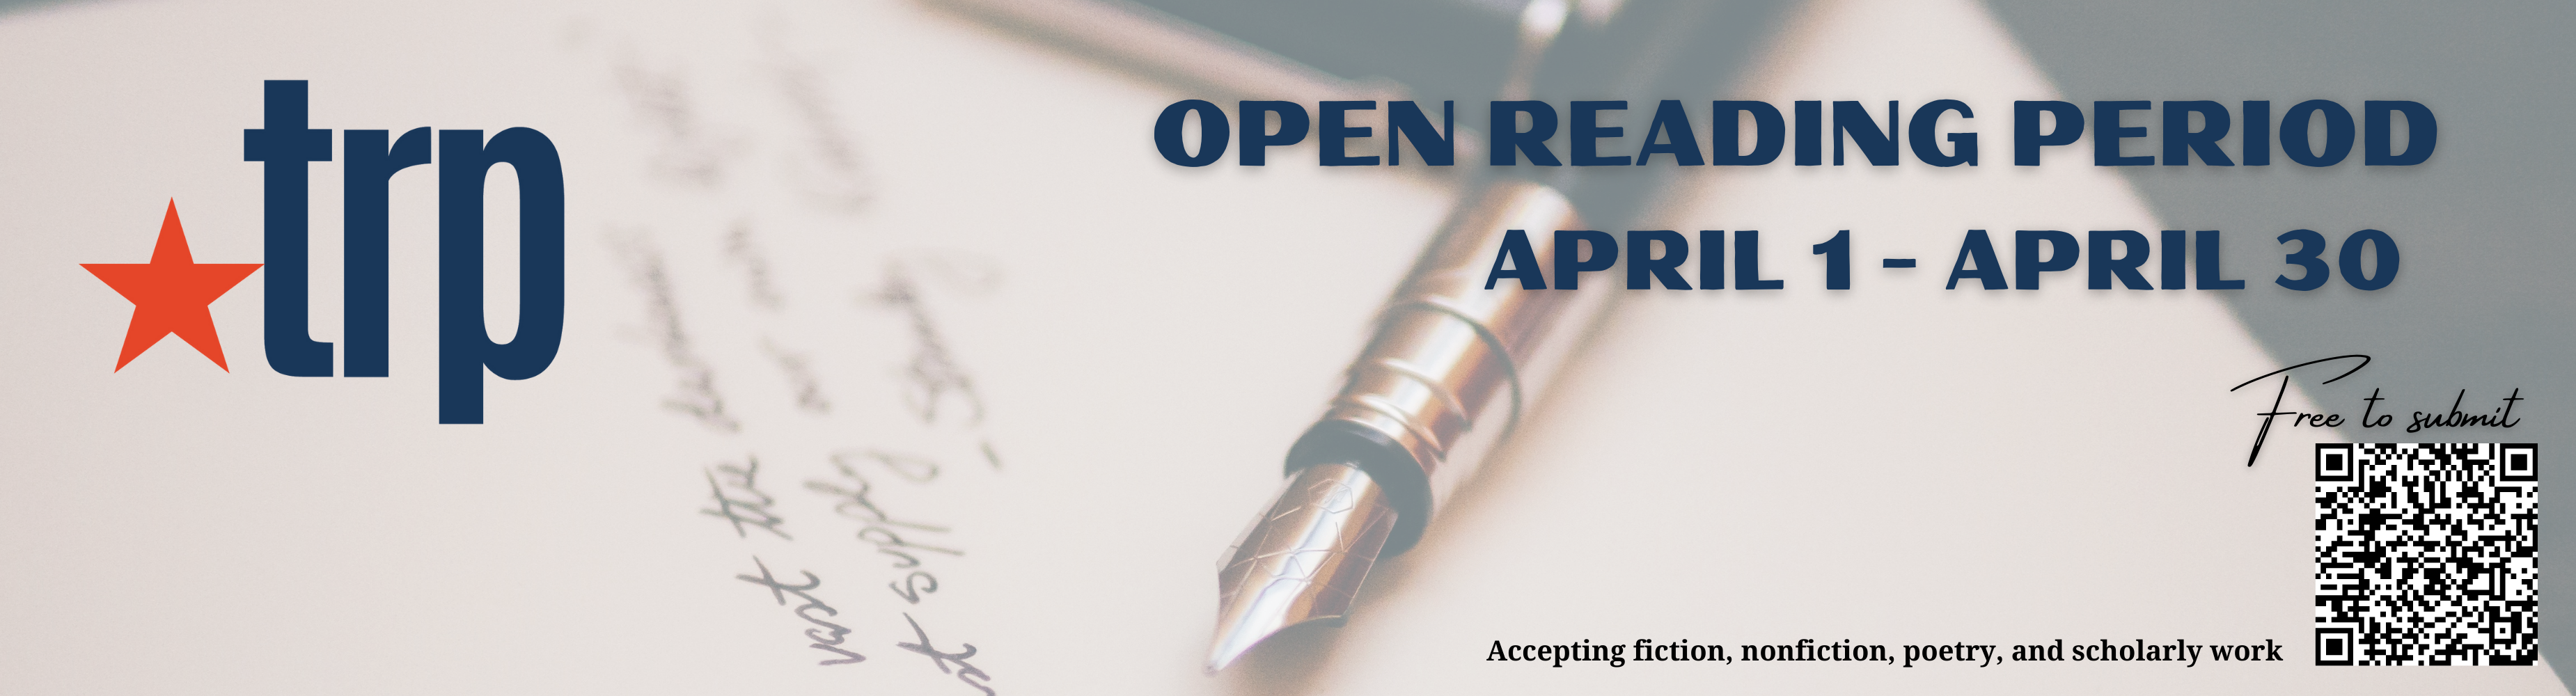 Open Reading Period Banner